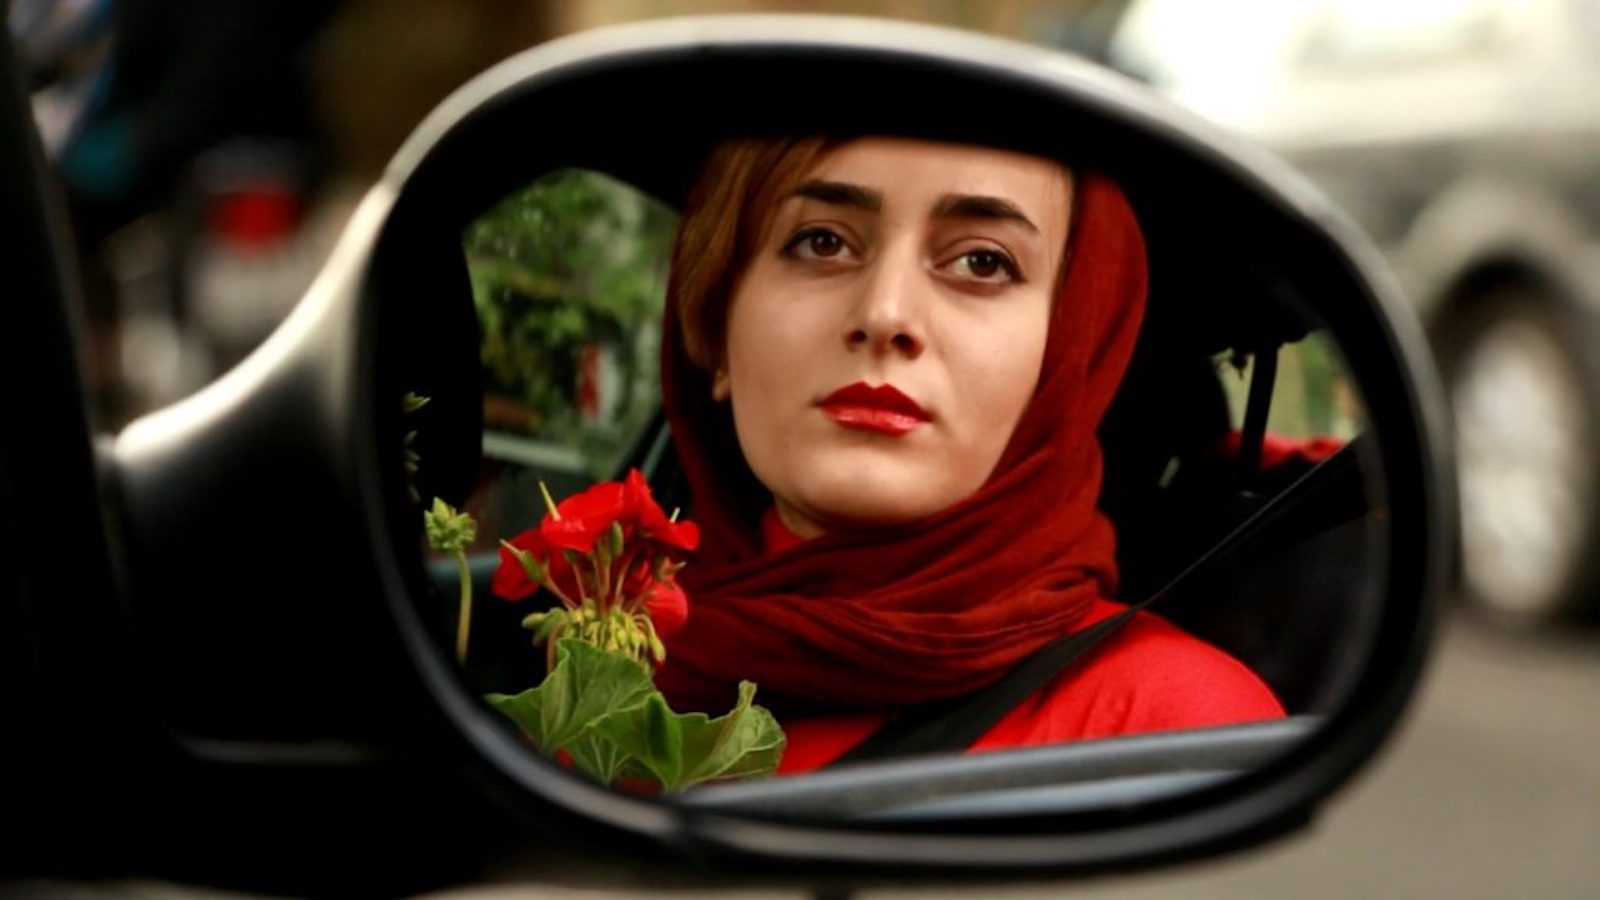 A woman with a red headscarf and red red jacket, and red lipstick holding a red geranium is seen in a reflection in a car's side mirror